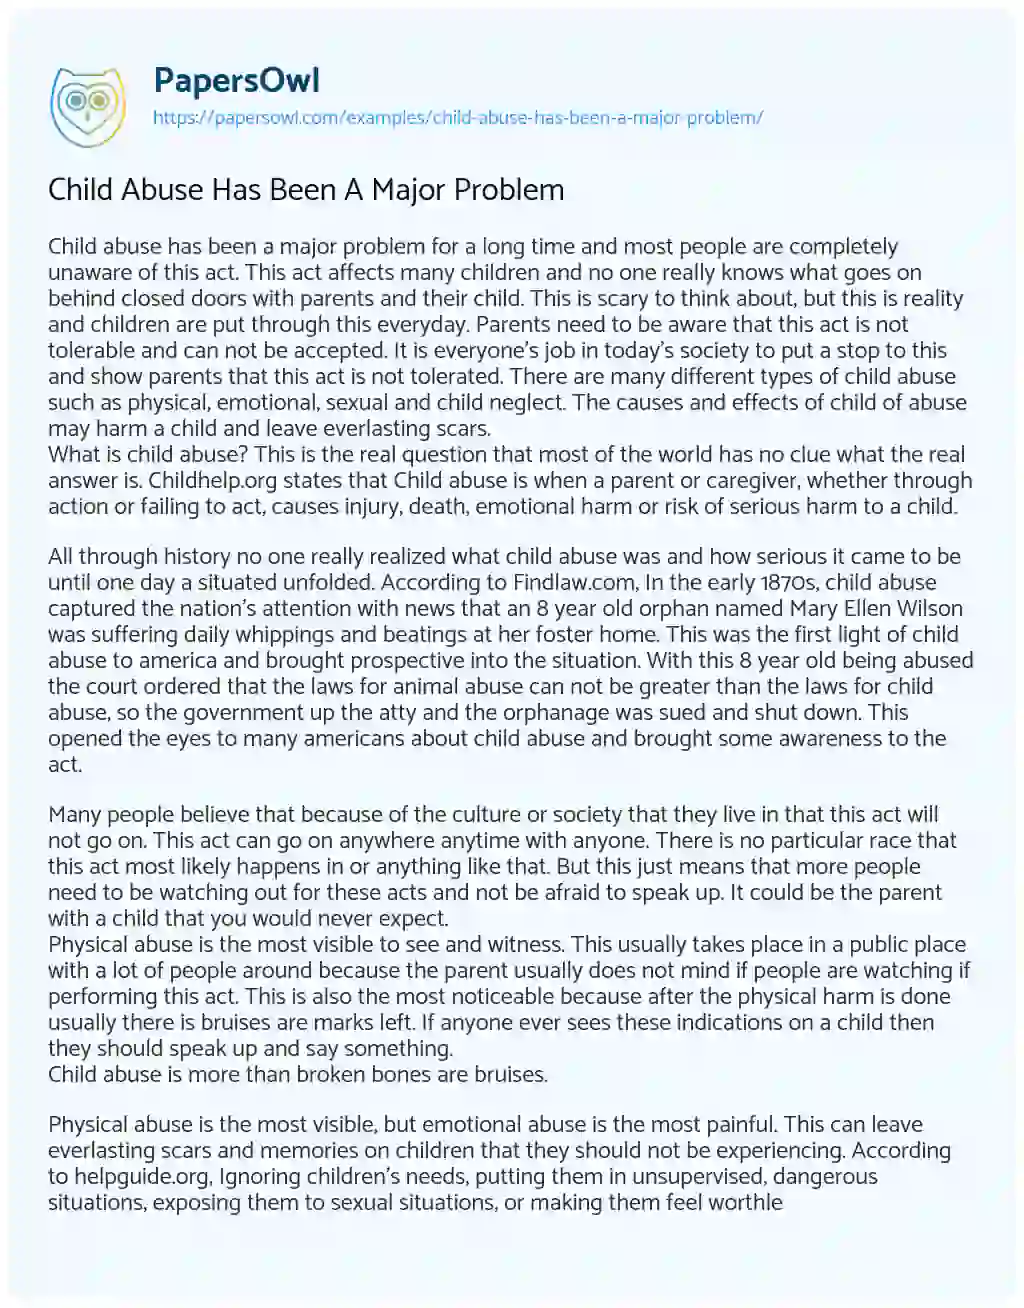 Essay on Child Abuse has been a Major Problem